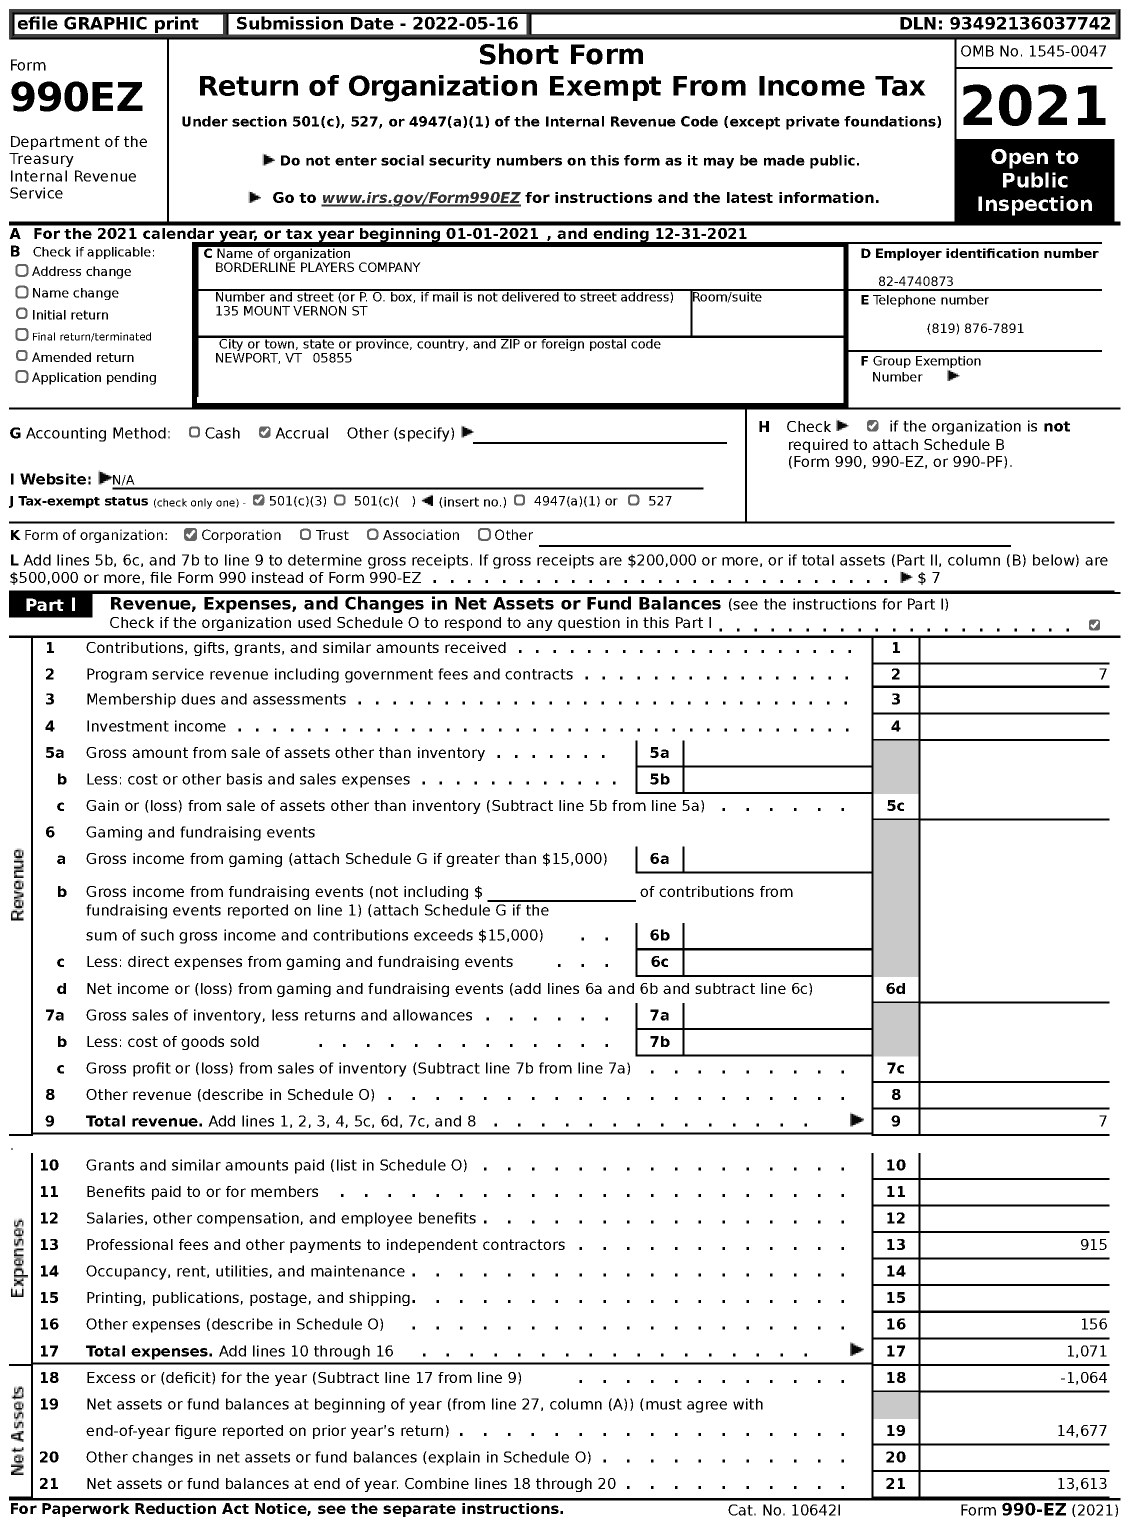 Image of first page of 2021 Form 990EZ for Borderline Players Company